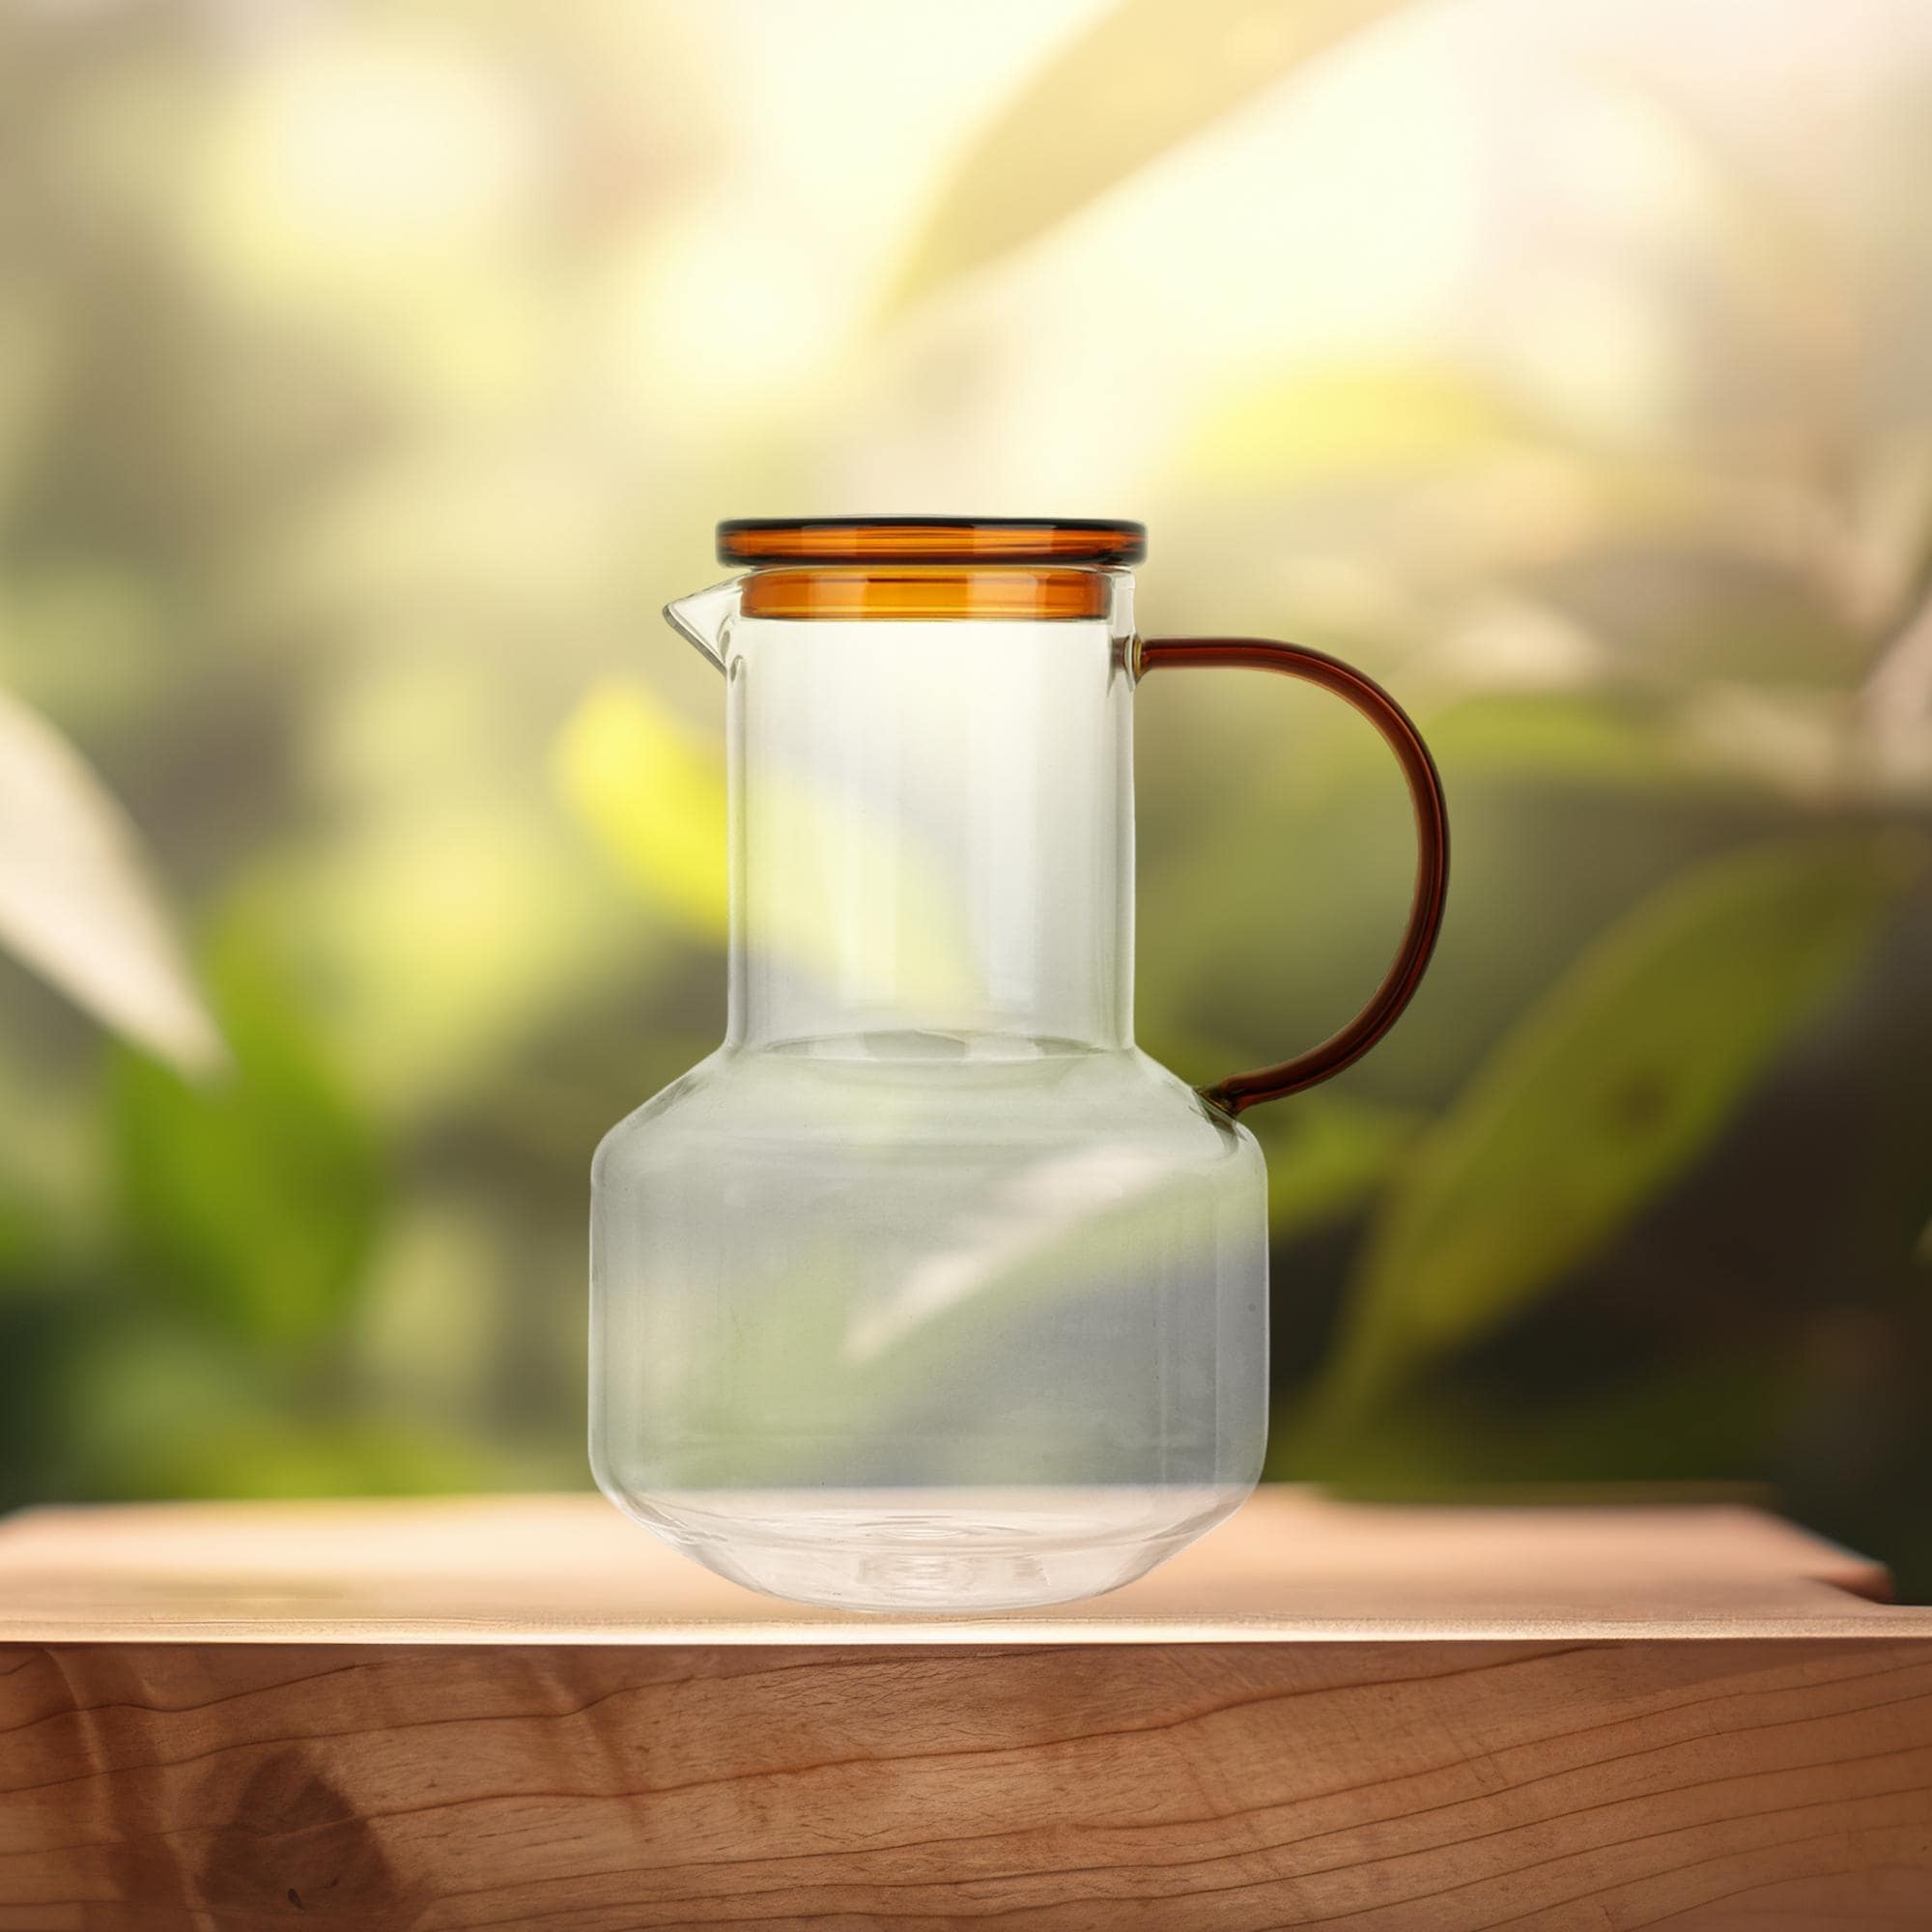 https://ak1.ostkcdn.com/images/products/is/images/direct/e10e63308c93f0e8573cdfe663602a9b77f12d5b/Elle-Decor-Glass-Pitcher-with-Amber-Lid-48-Ounce.jpg